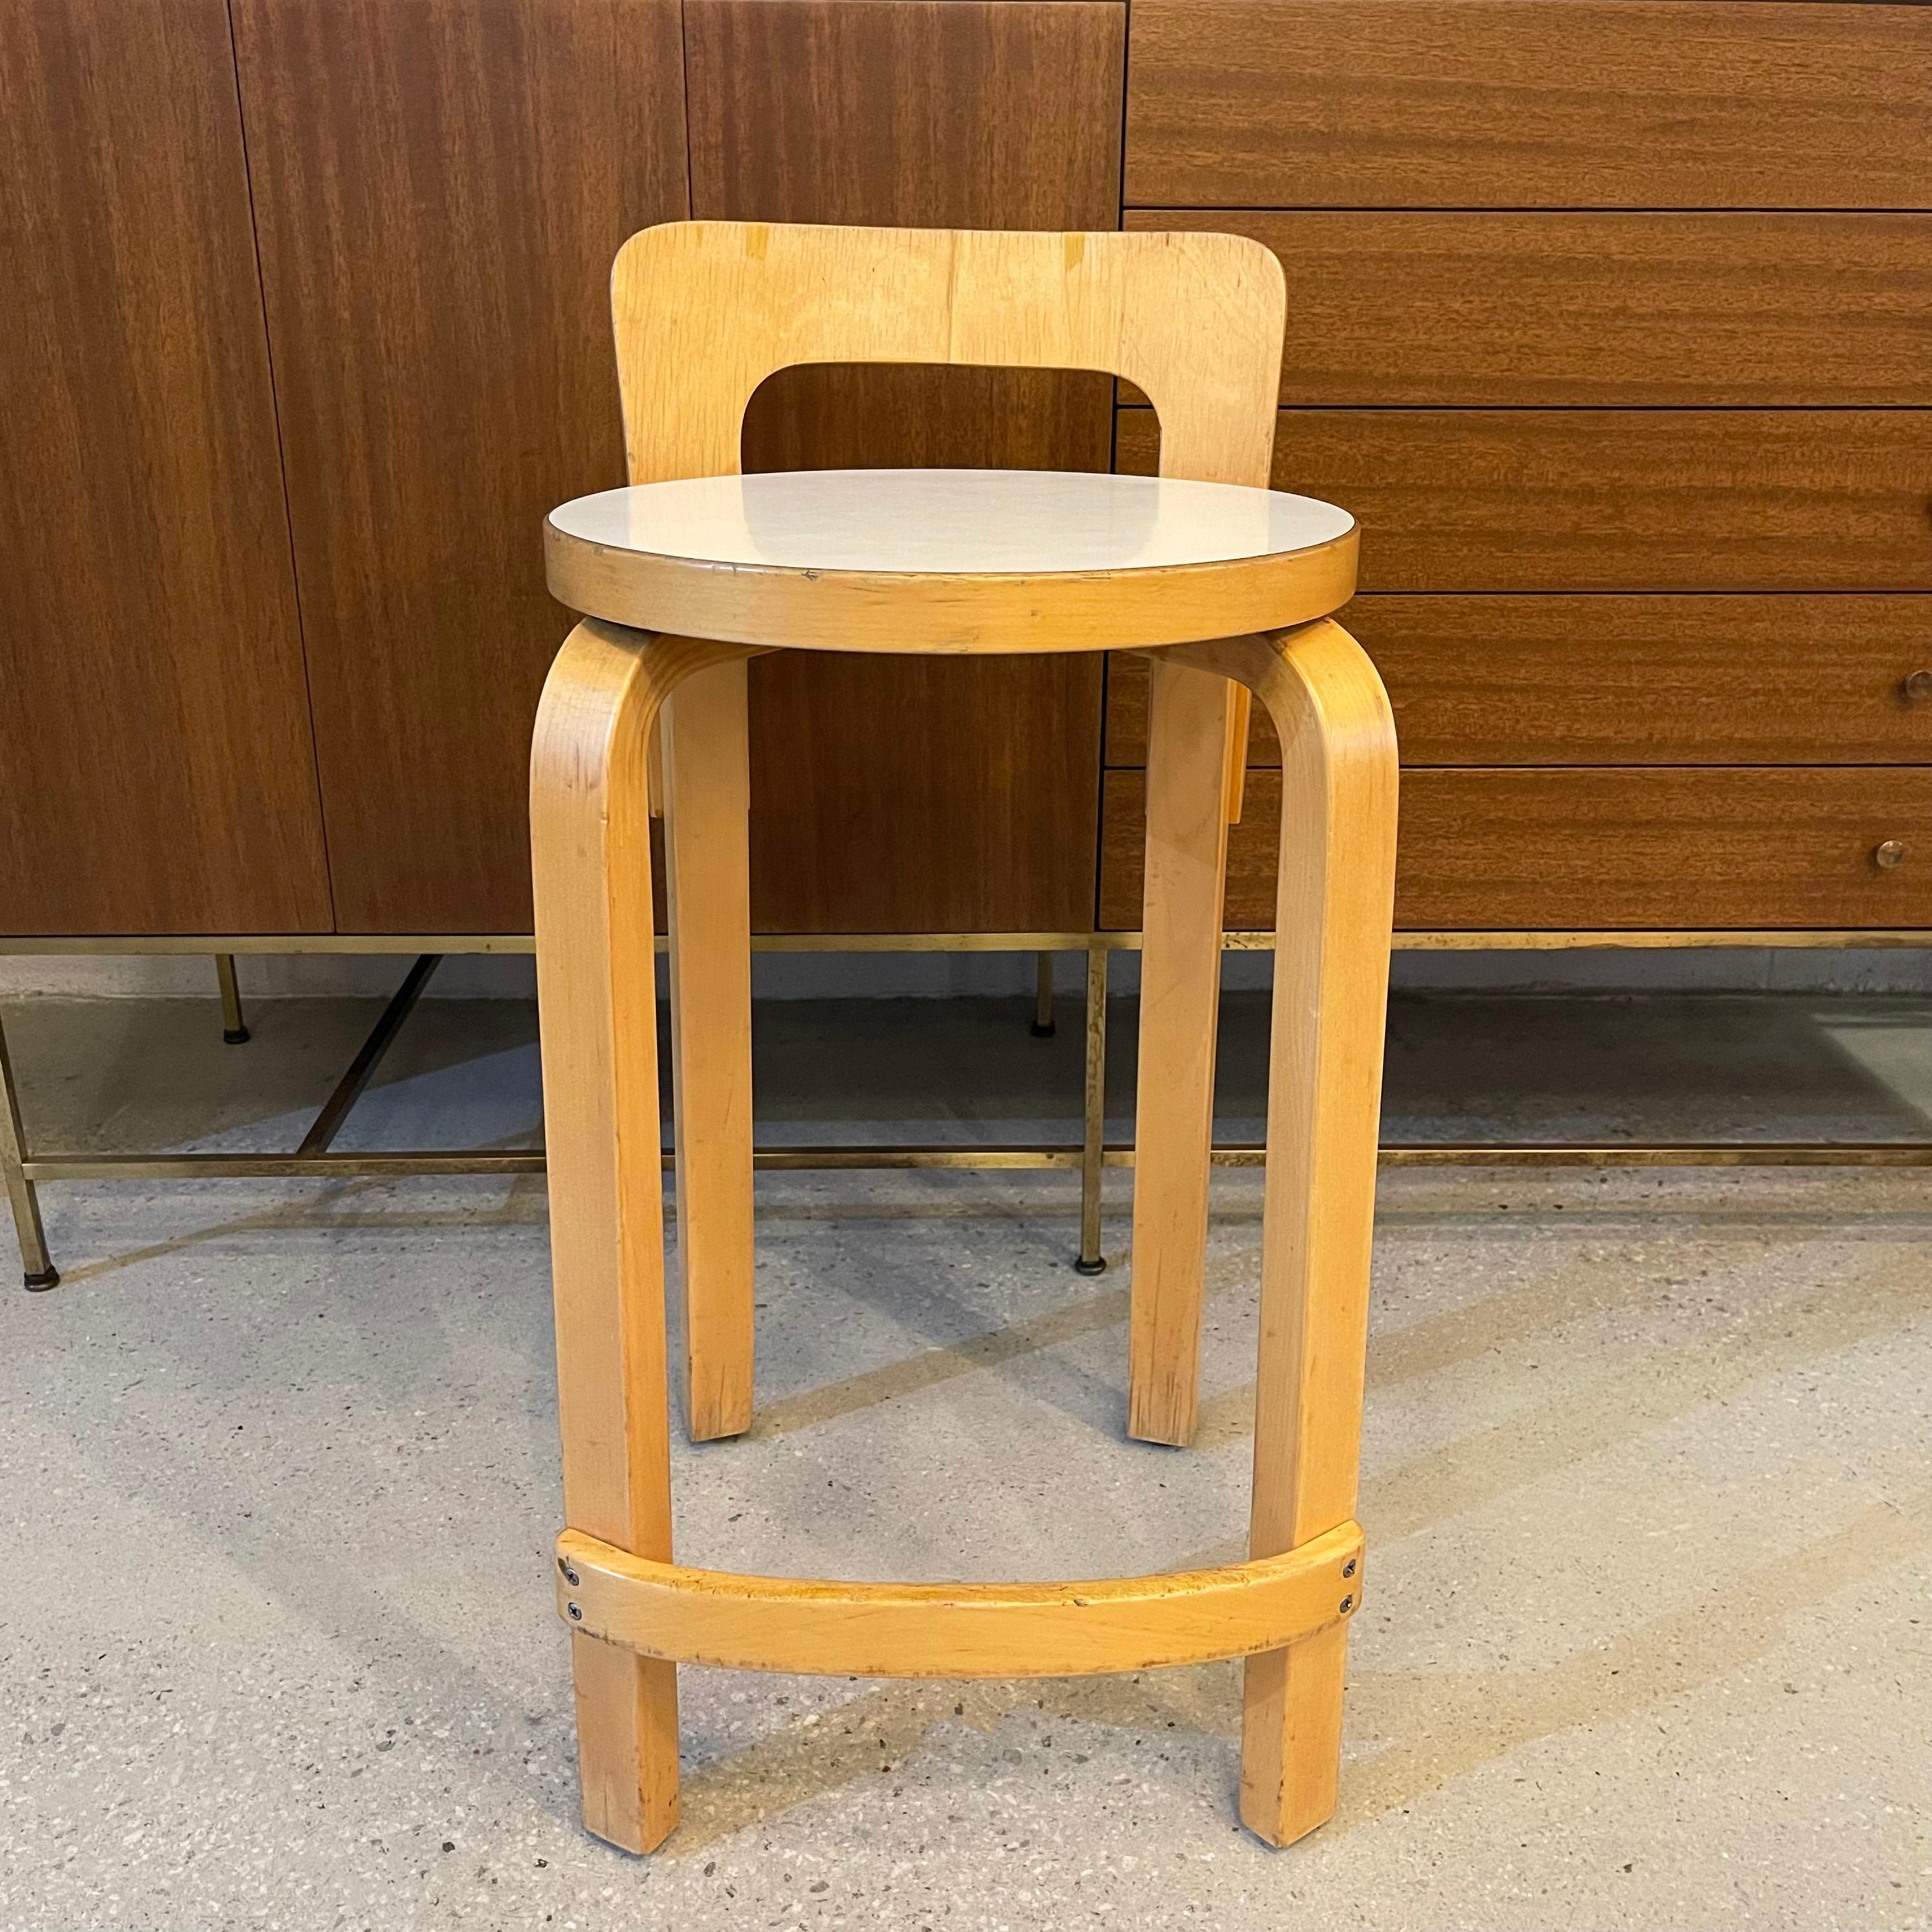 Mid-century modern, counter height stool designed by Alvar Aalto for Artek features a bent birch wood frame with white laminate 13 inch diameter seat. 